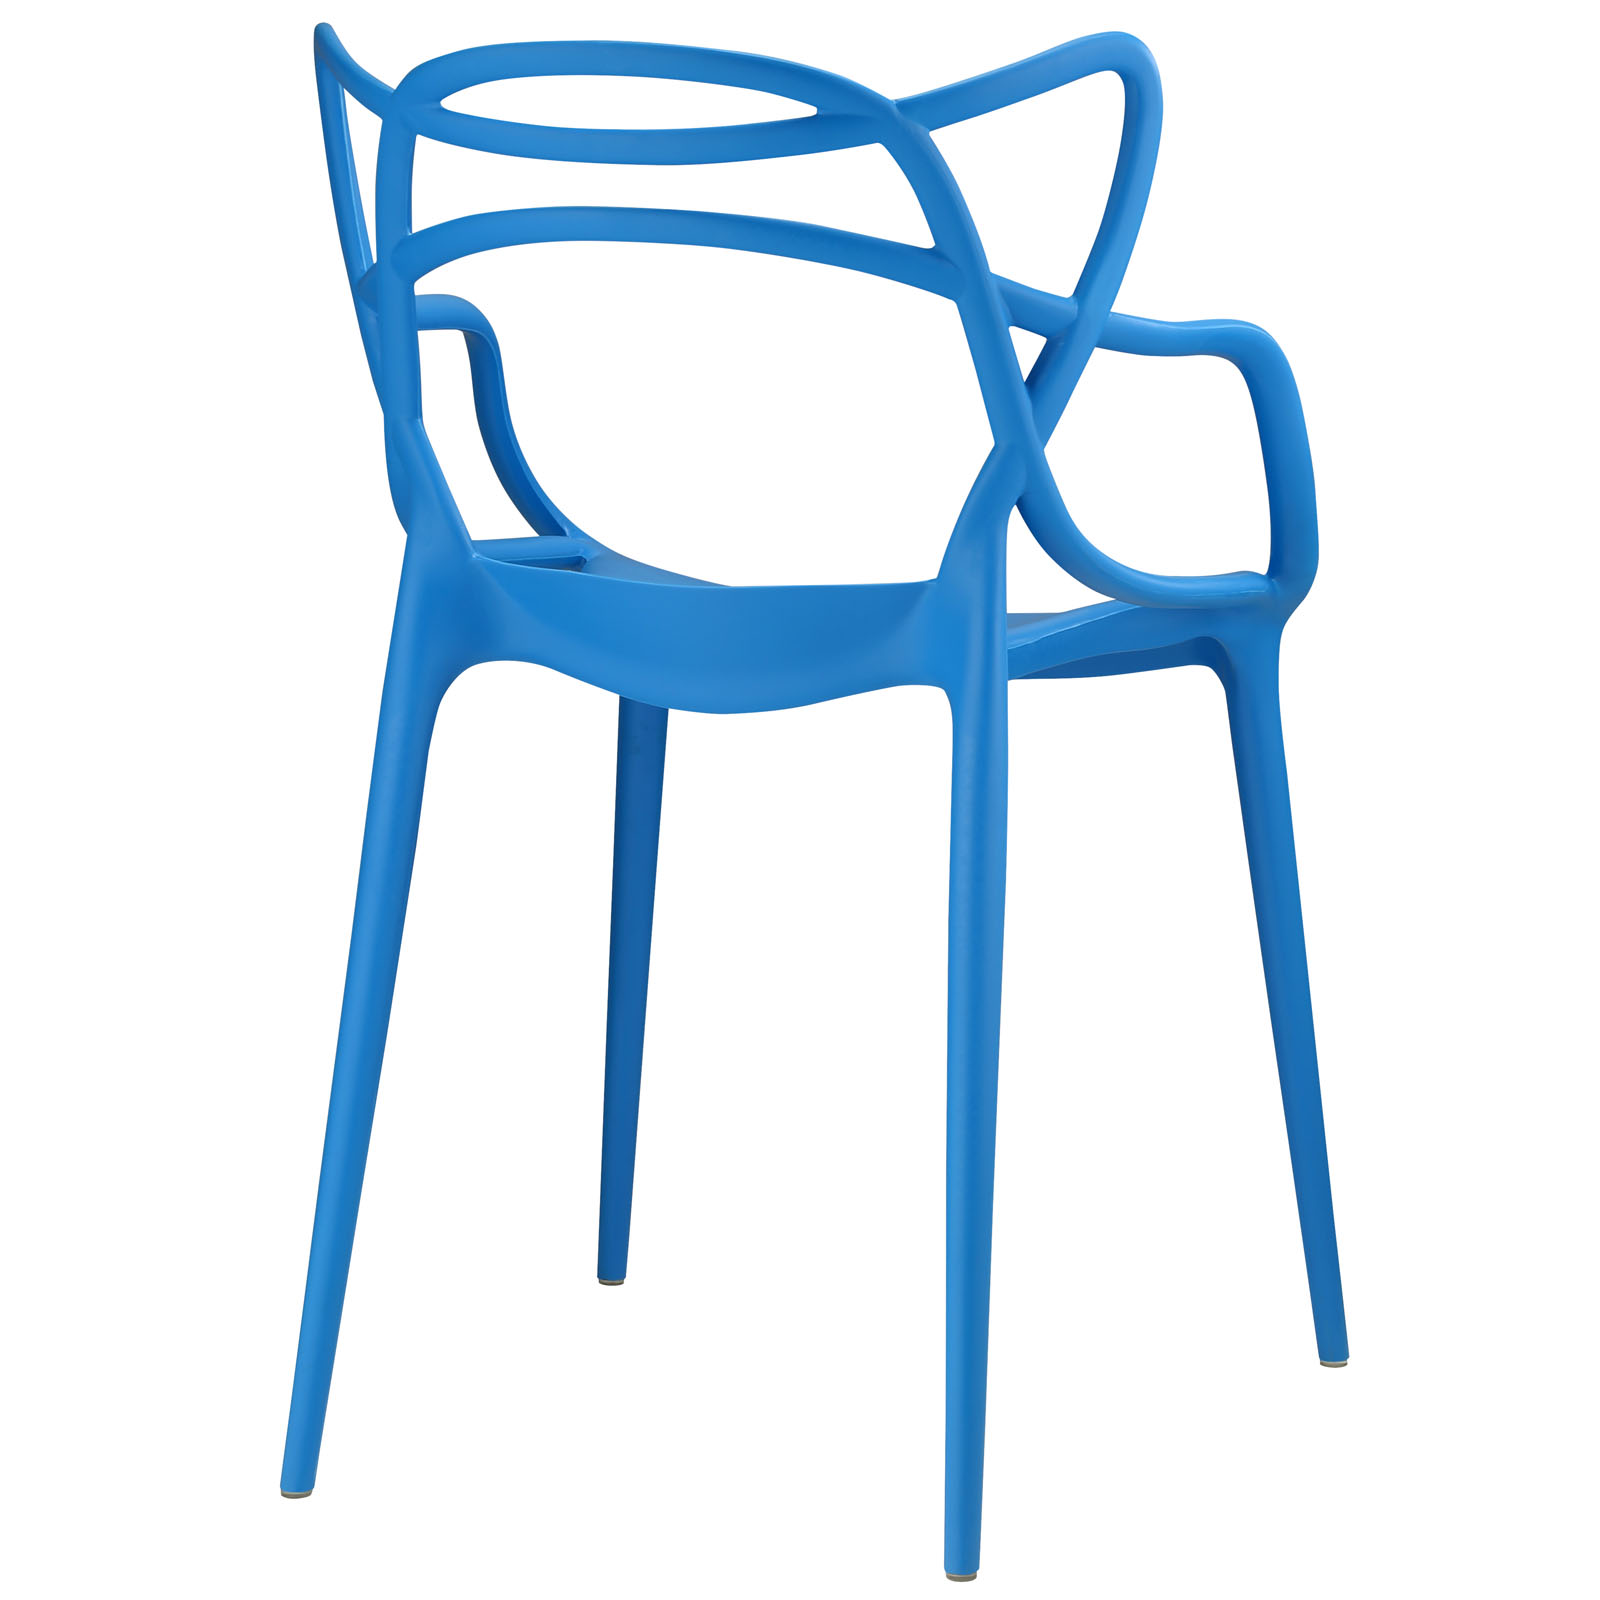 Modern Contemporary Urban Design Outdoor Kitchen Room Dining Chair Set ( Set of Two), Blue, Plastic - image 4 of 4